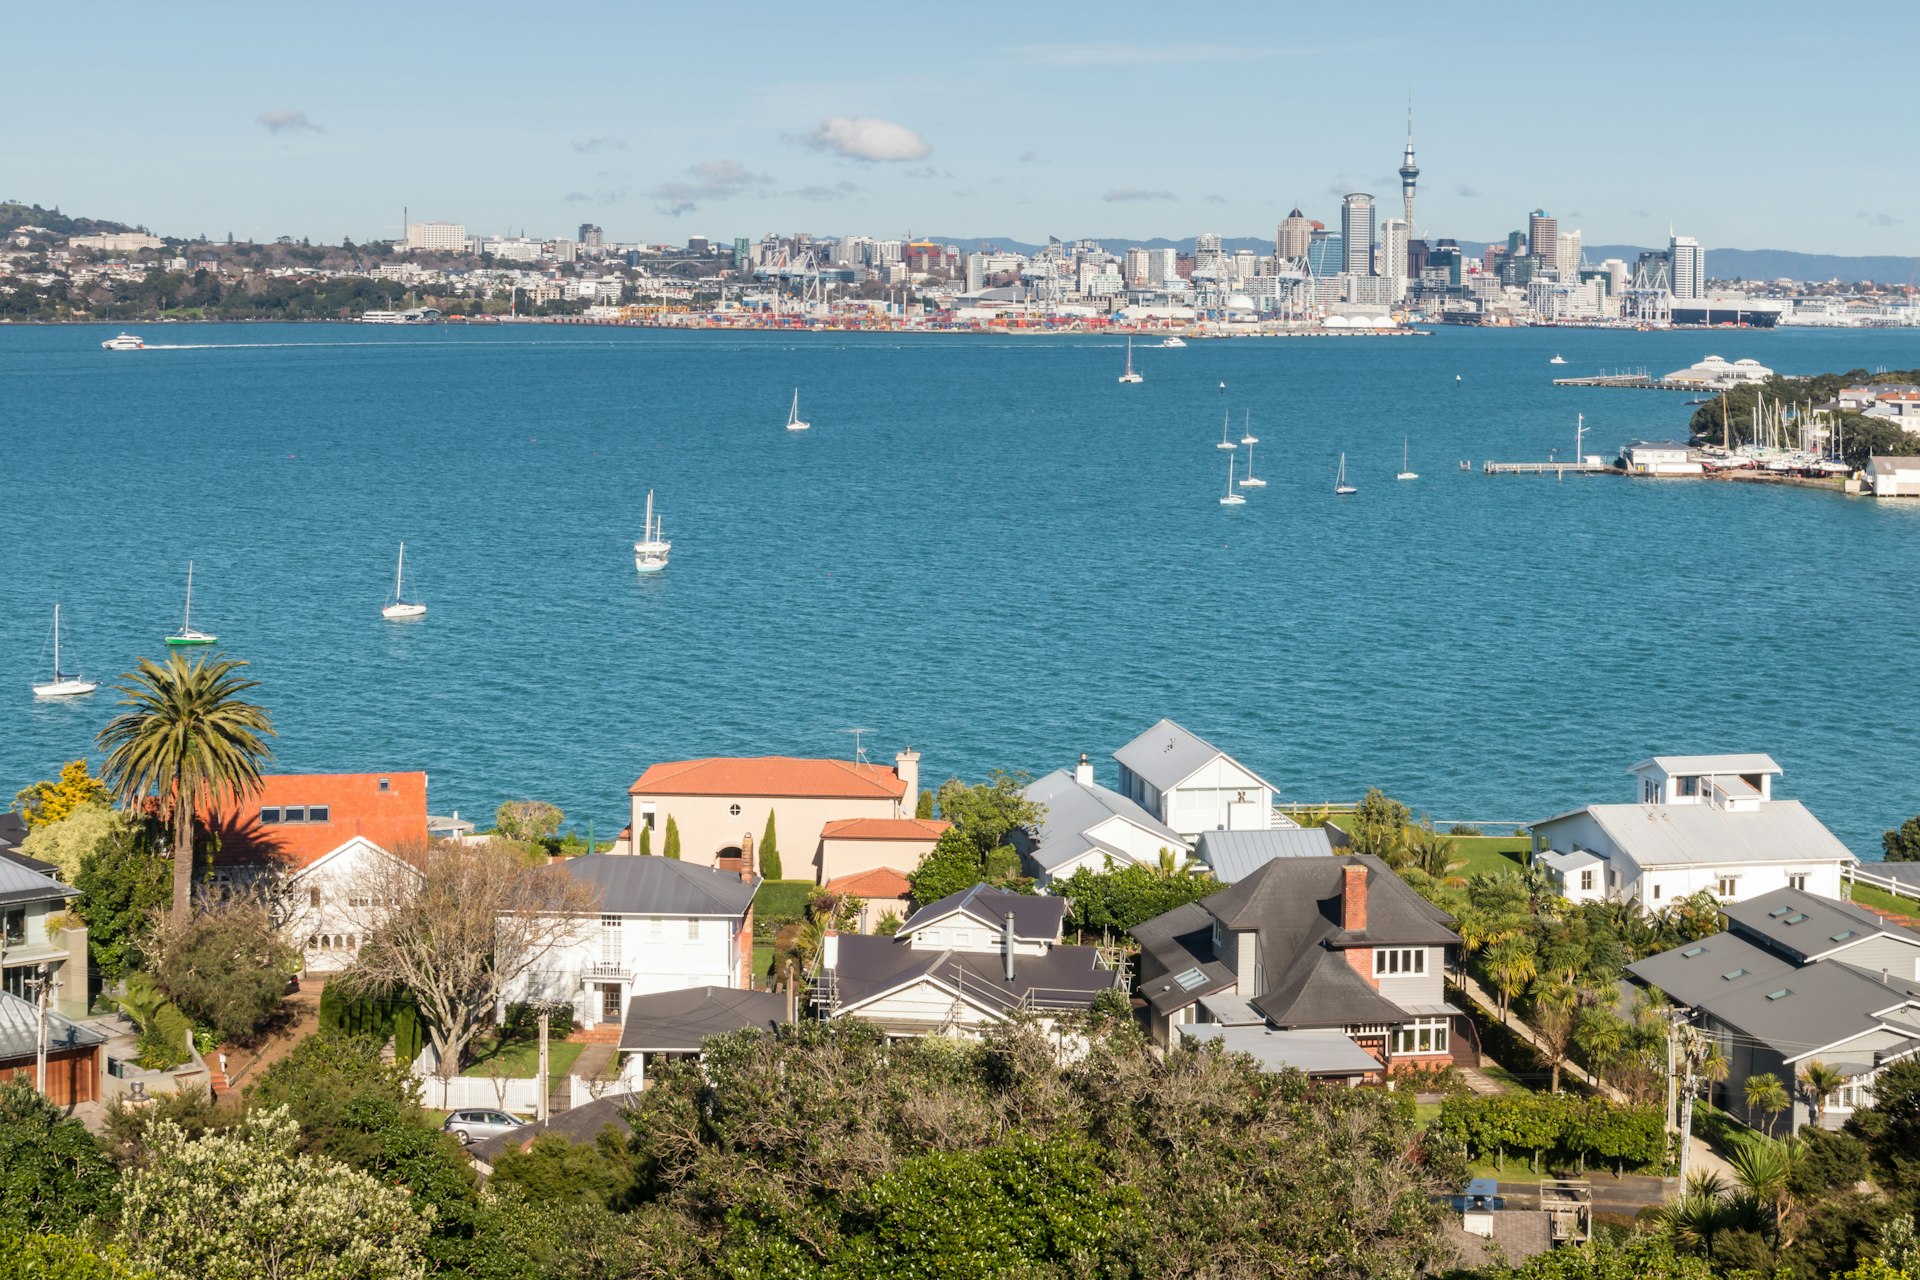 Bayside houses in the Devonport suburb with the Auckland city skyline beyond. 